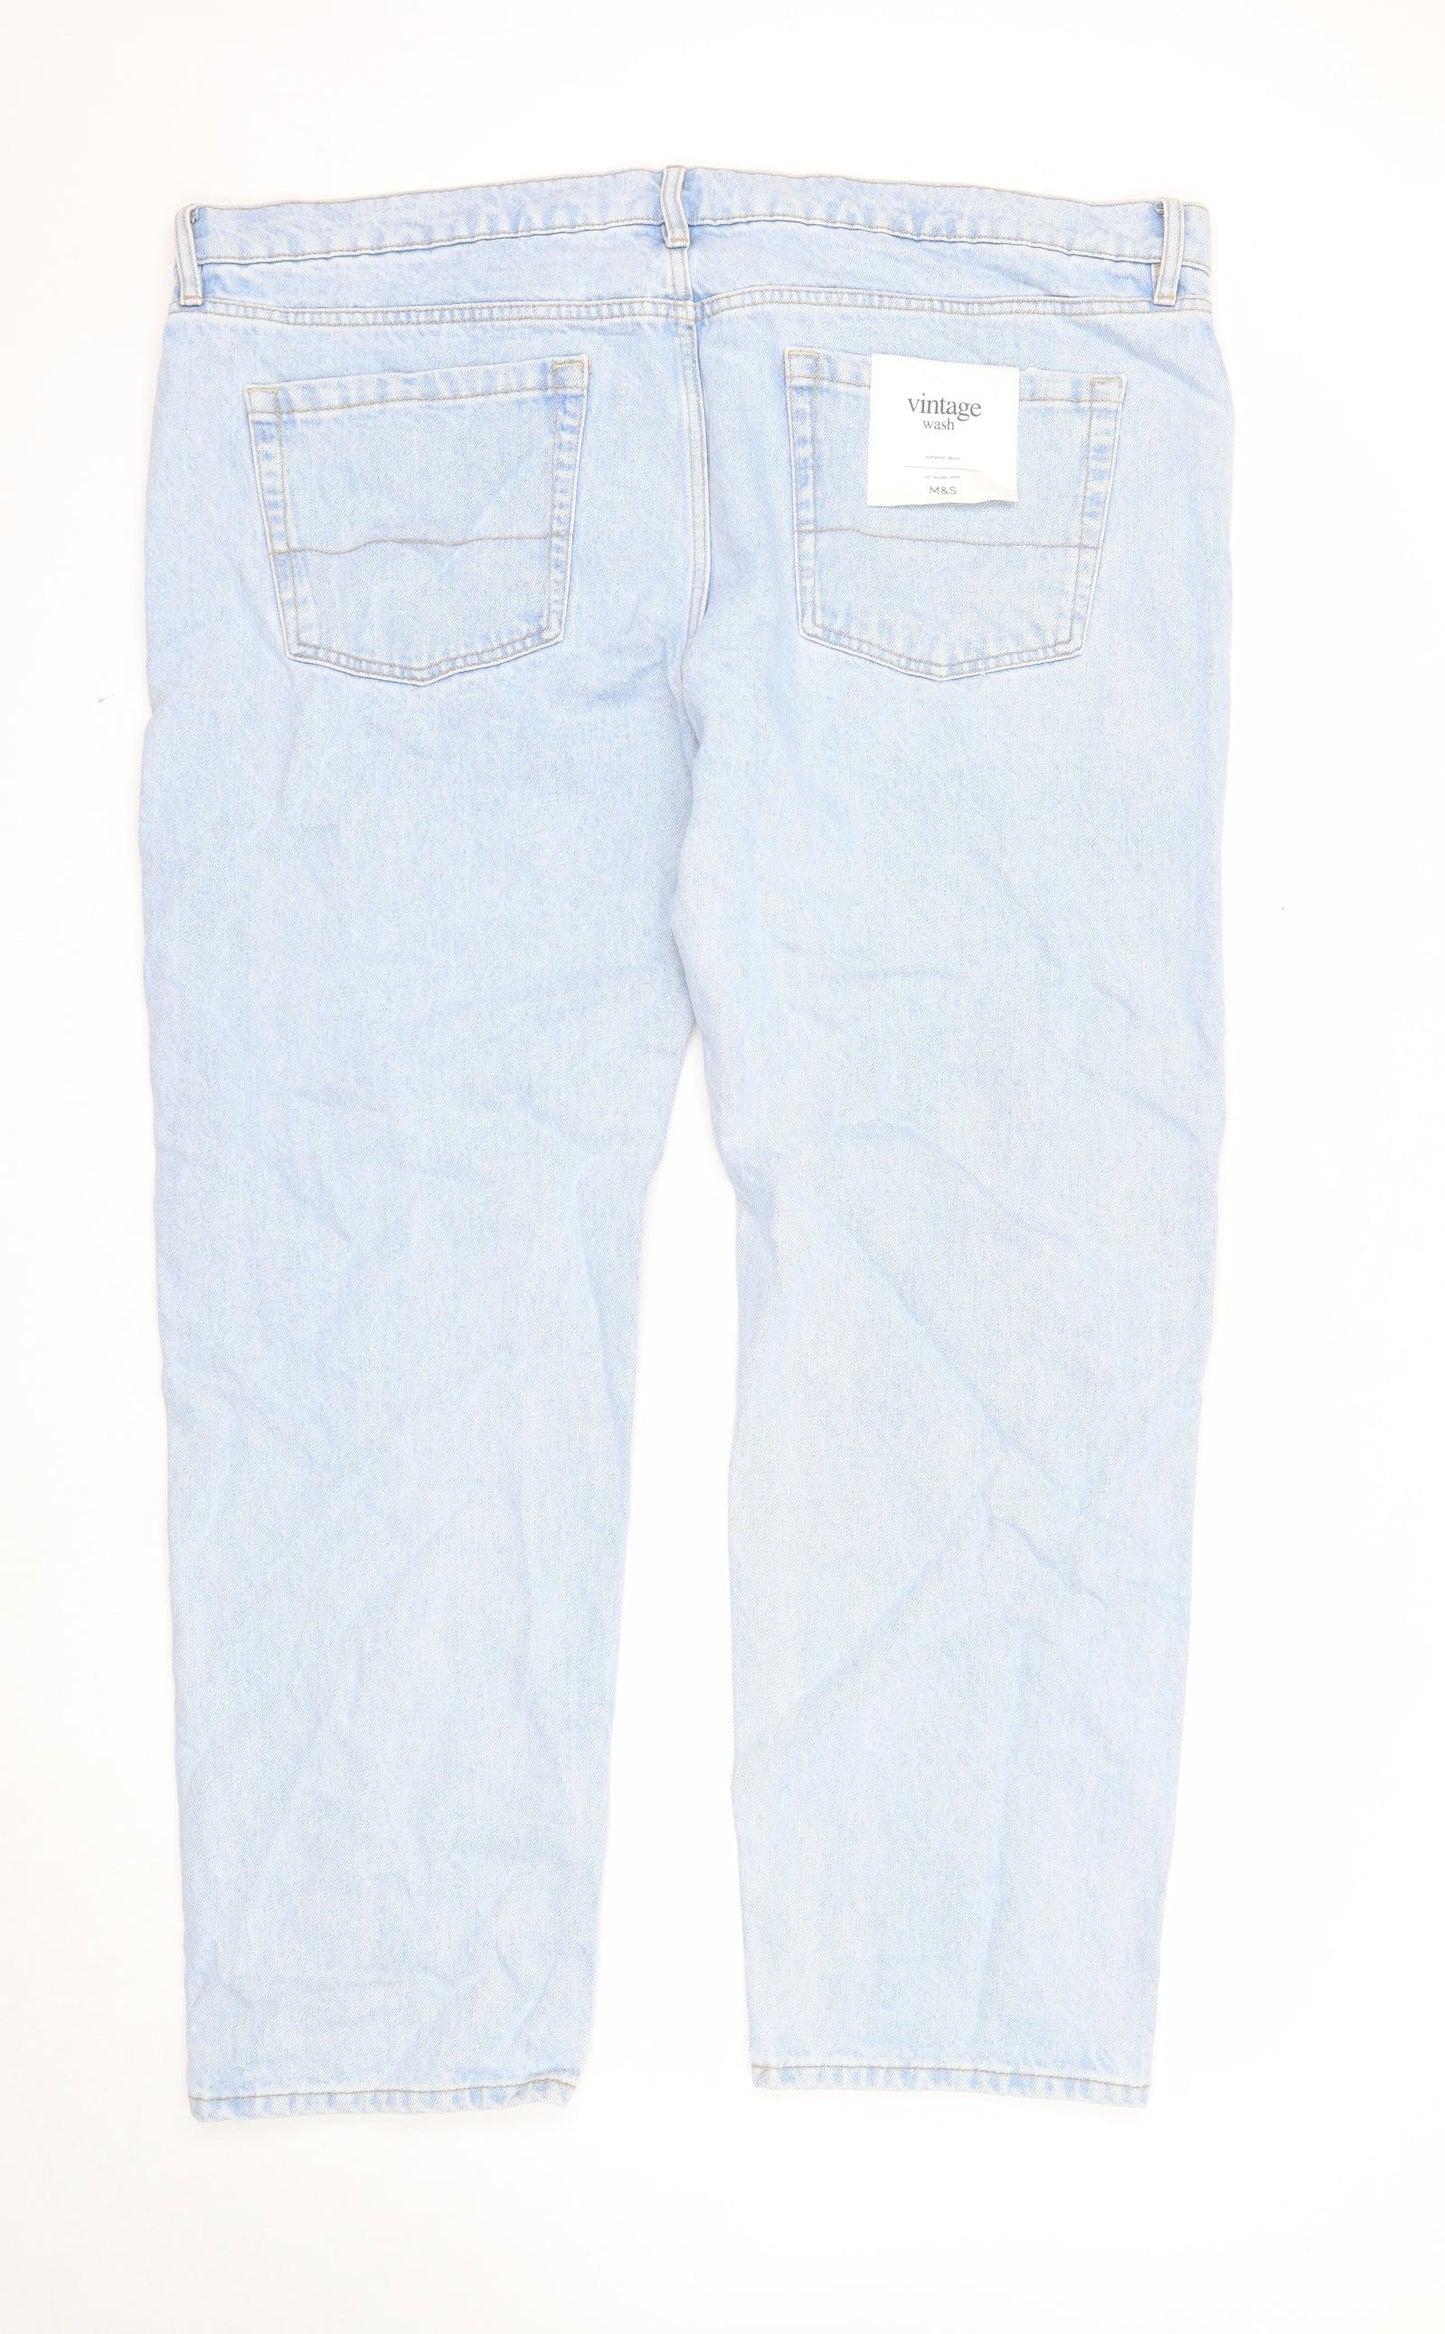 Marks and Spencer Mens Blue Cotton Straight Jeans Size 44 in L31 in Regular Zip - Vintage Wash